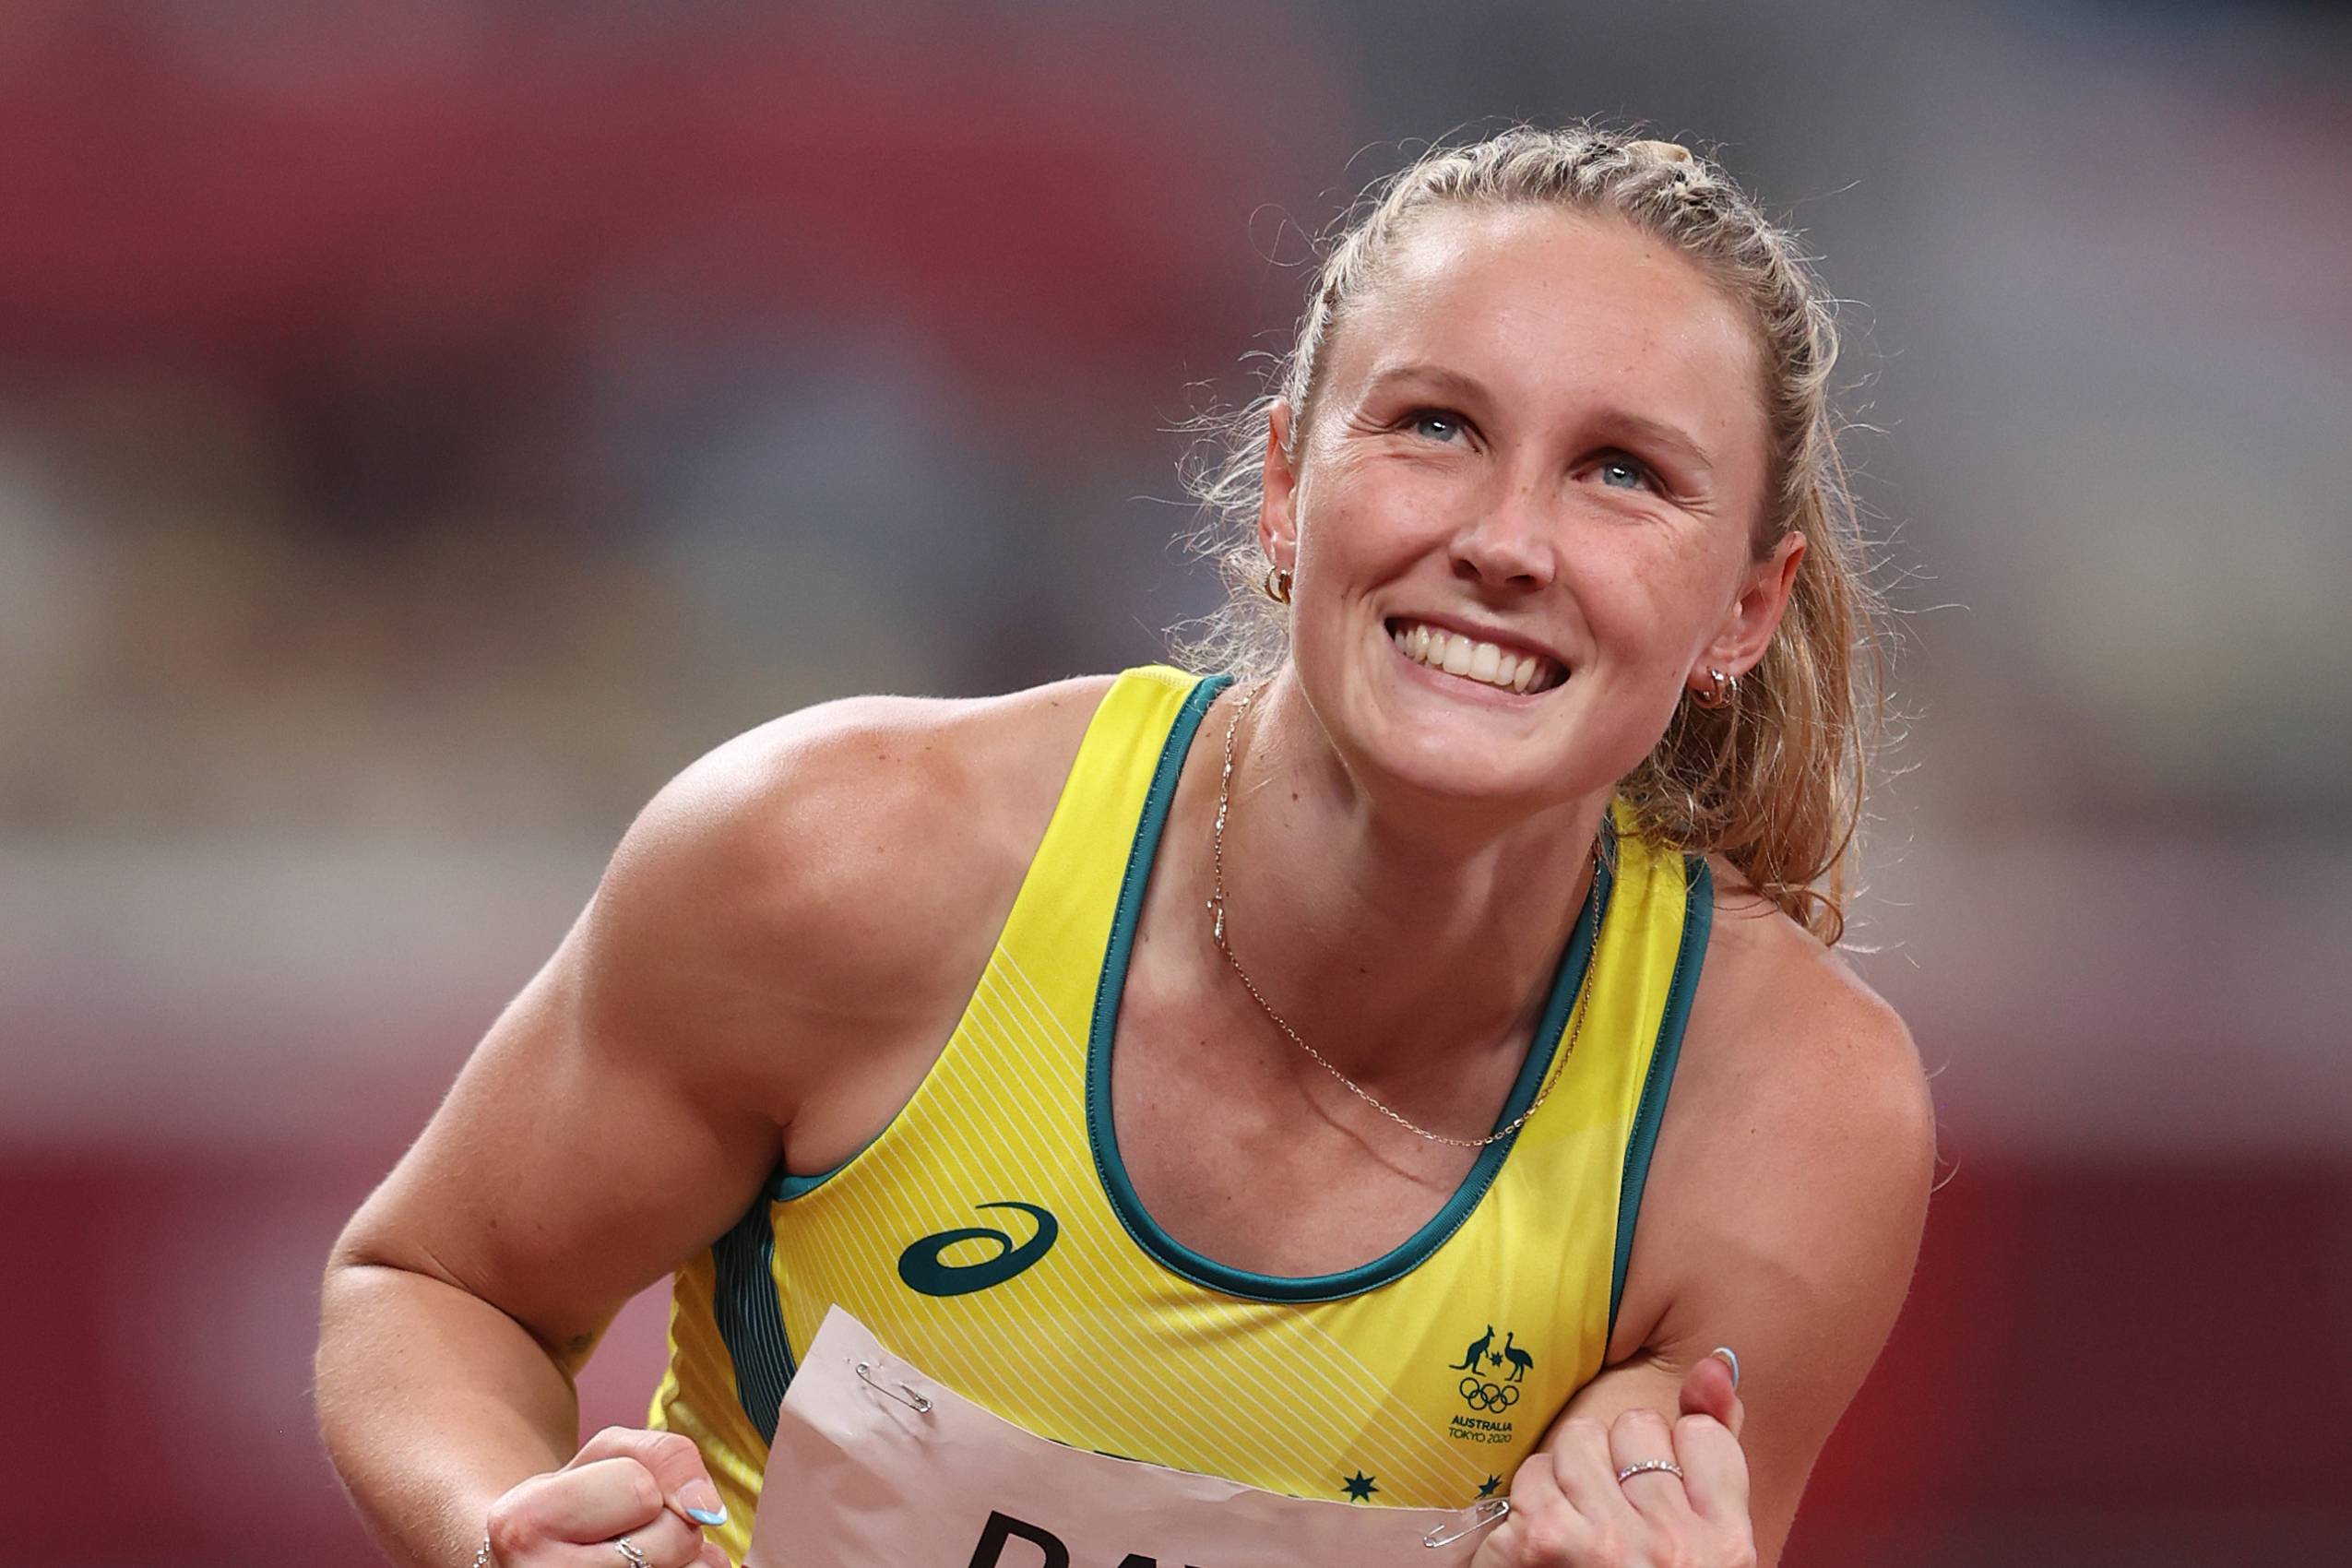 An Aus Sprinter Gained Nearly 50K Followers After Hyping Her IG On TV & Let The Spon Con Begin